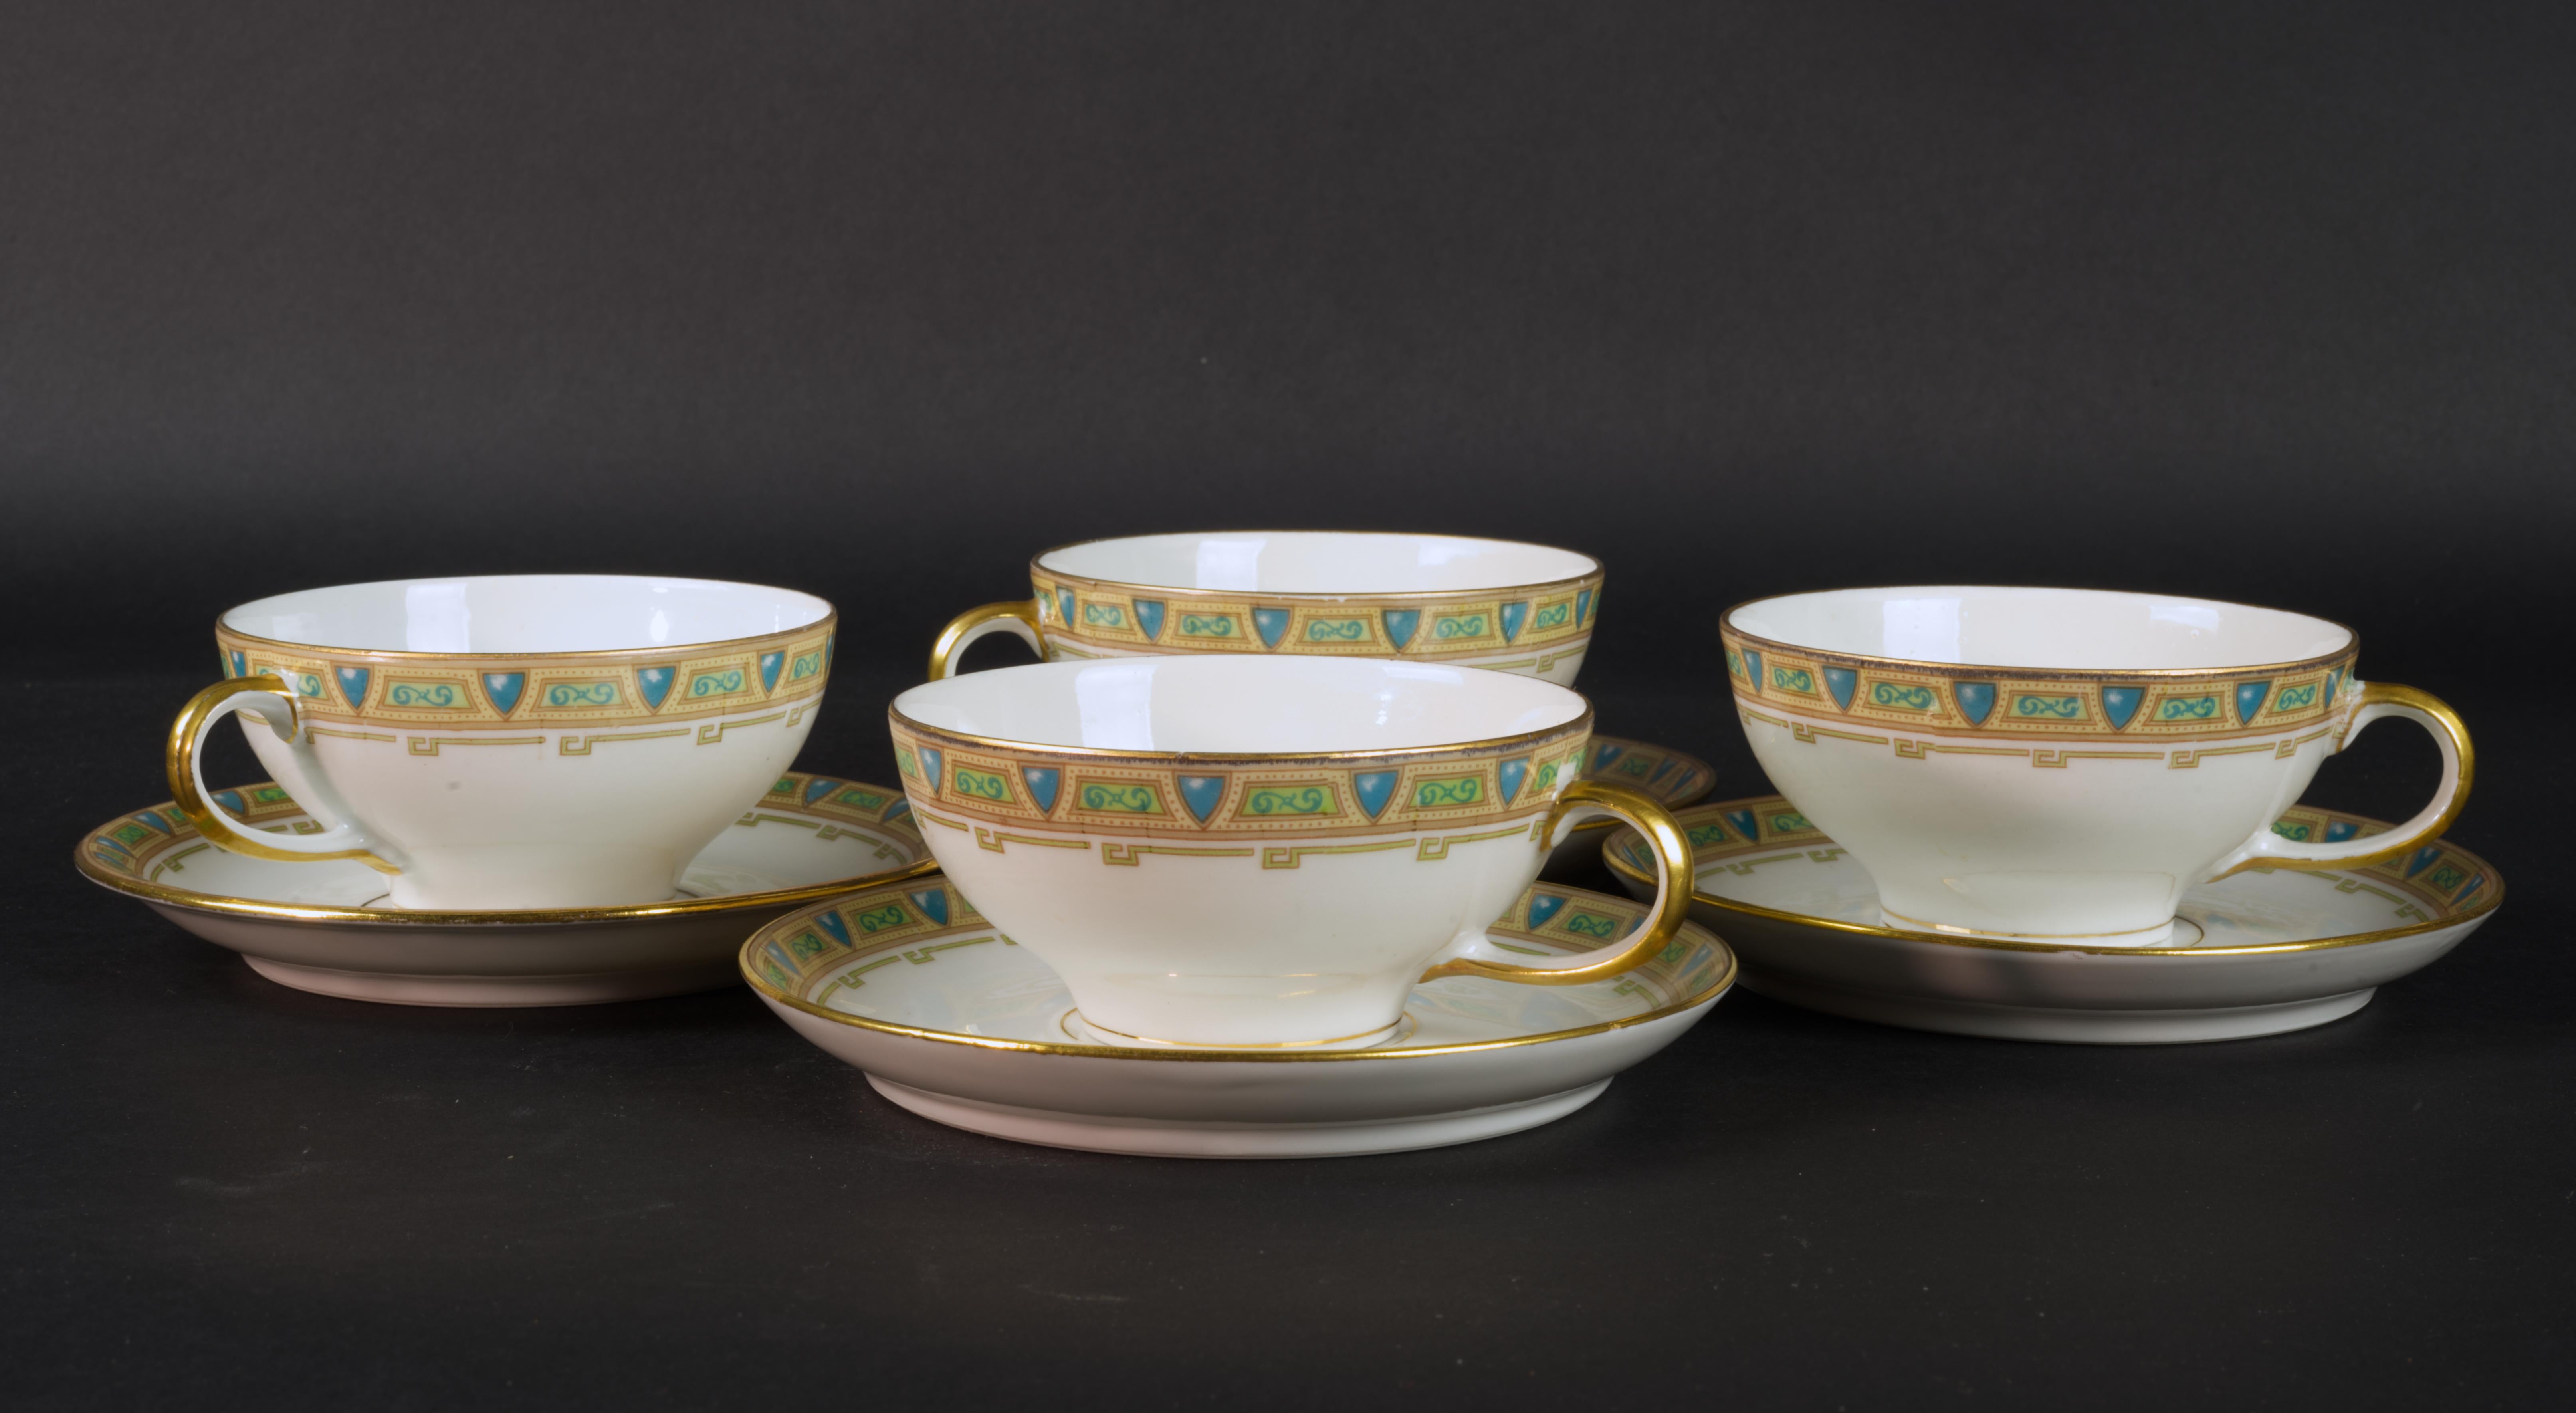 Neoclassical Guerin &Co Limoges France Set of Four Porcelain Cups and Saucers 1891-1900